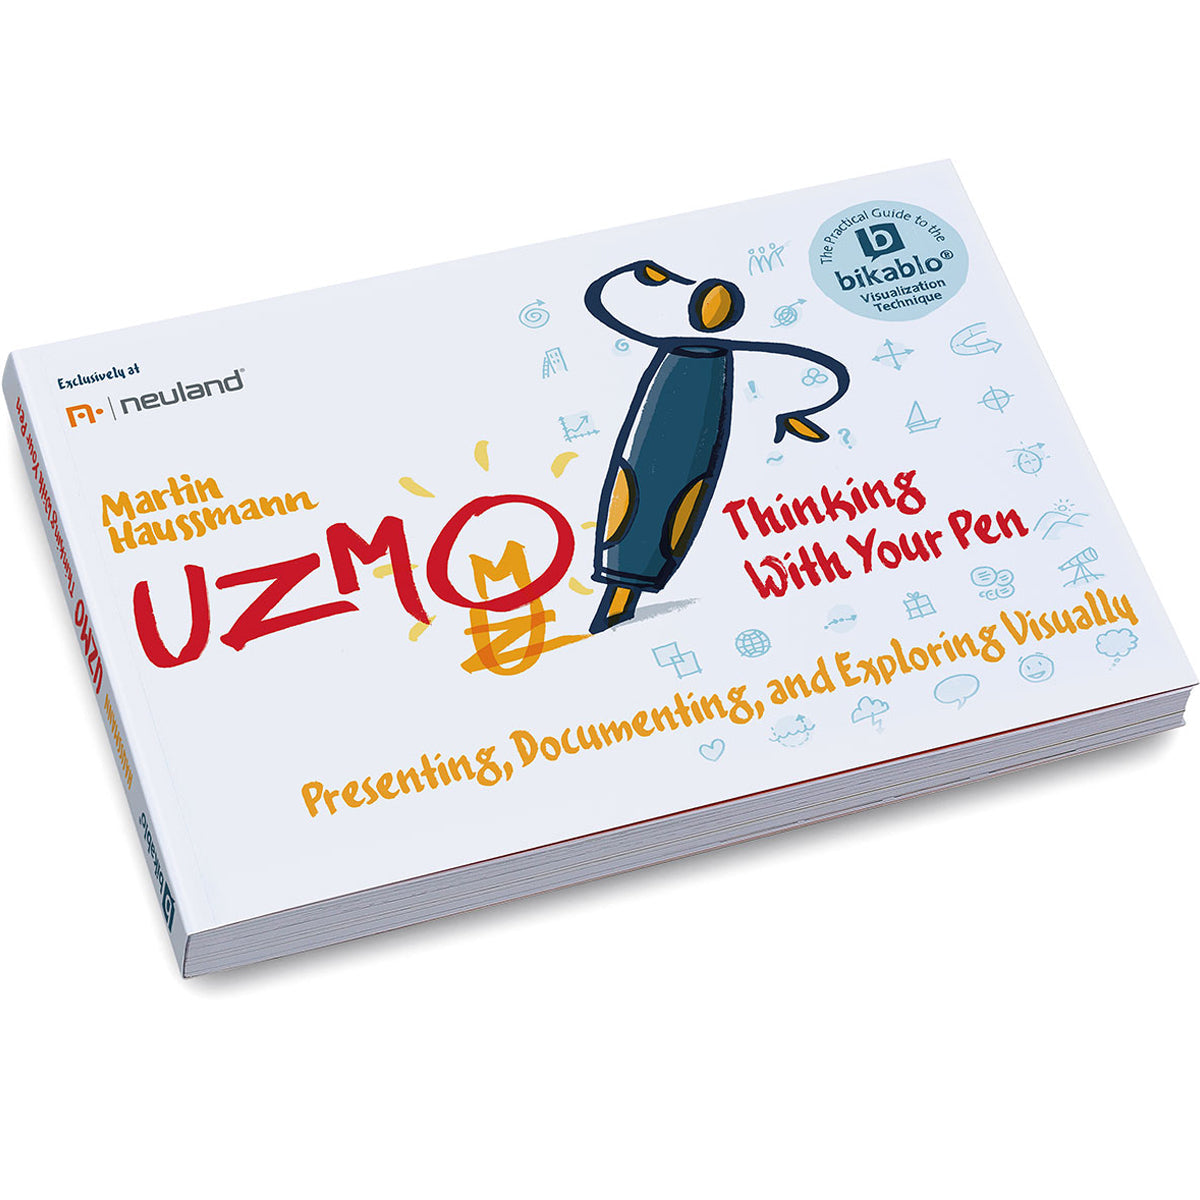 UZMO - Thinking with the pen